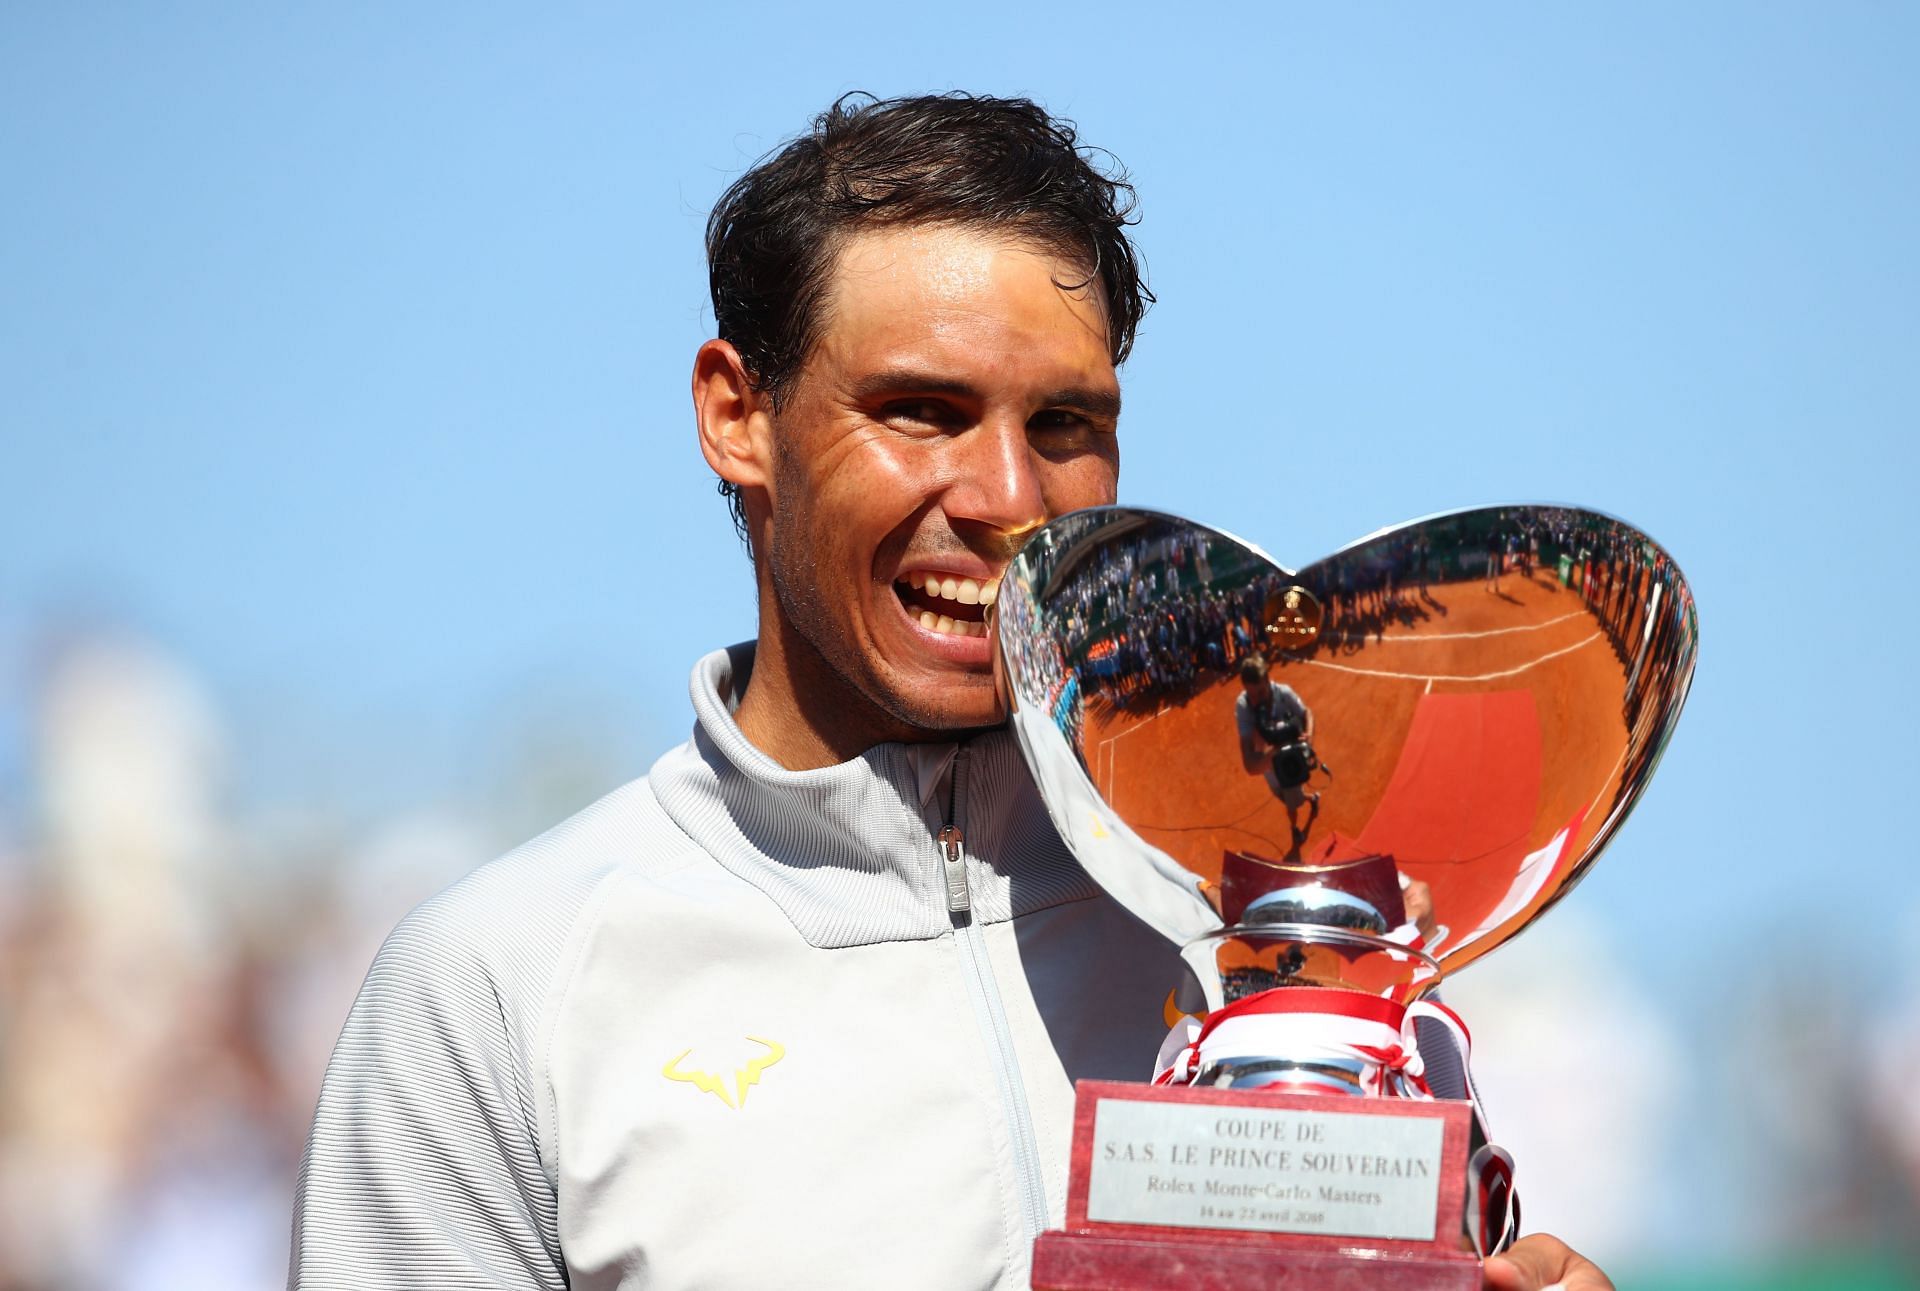 The Spaniard is a 11-time winner at the Monte-Carlo Masters